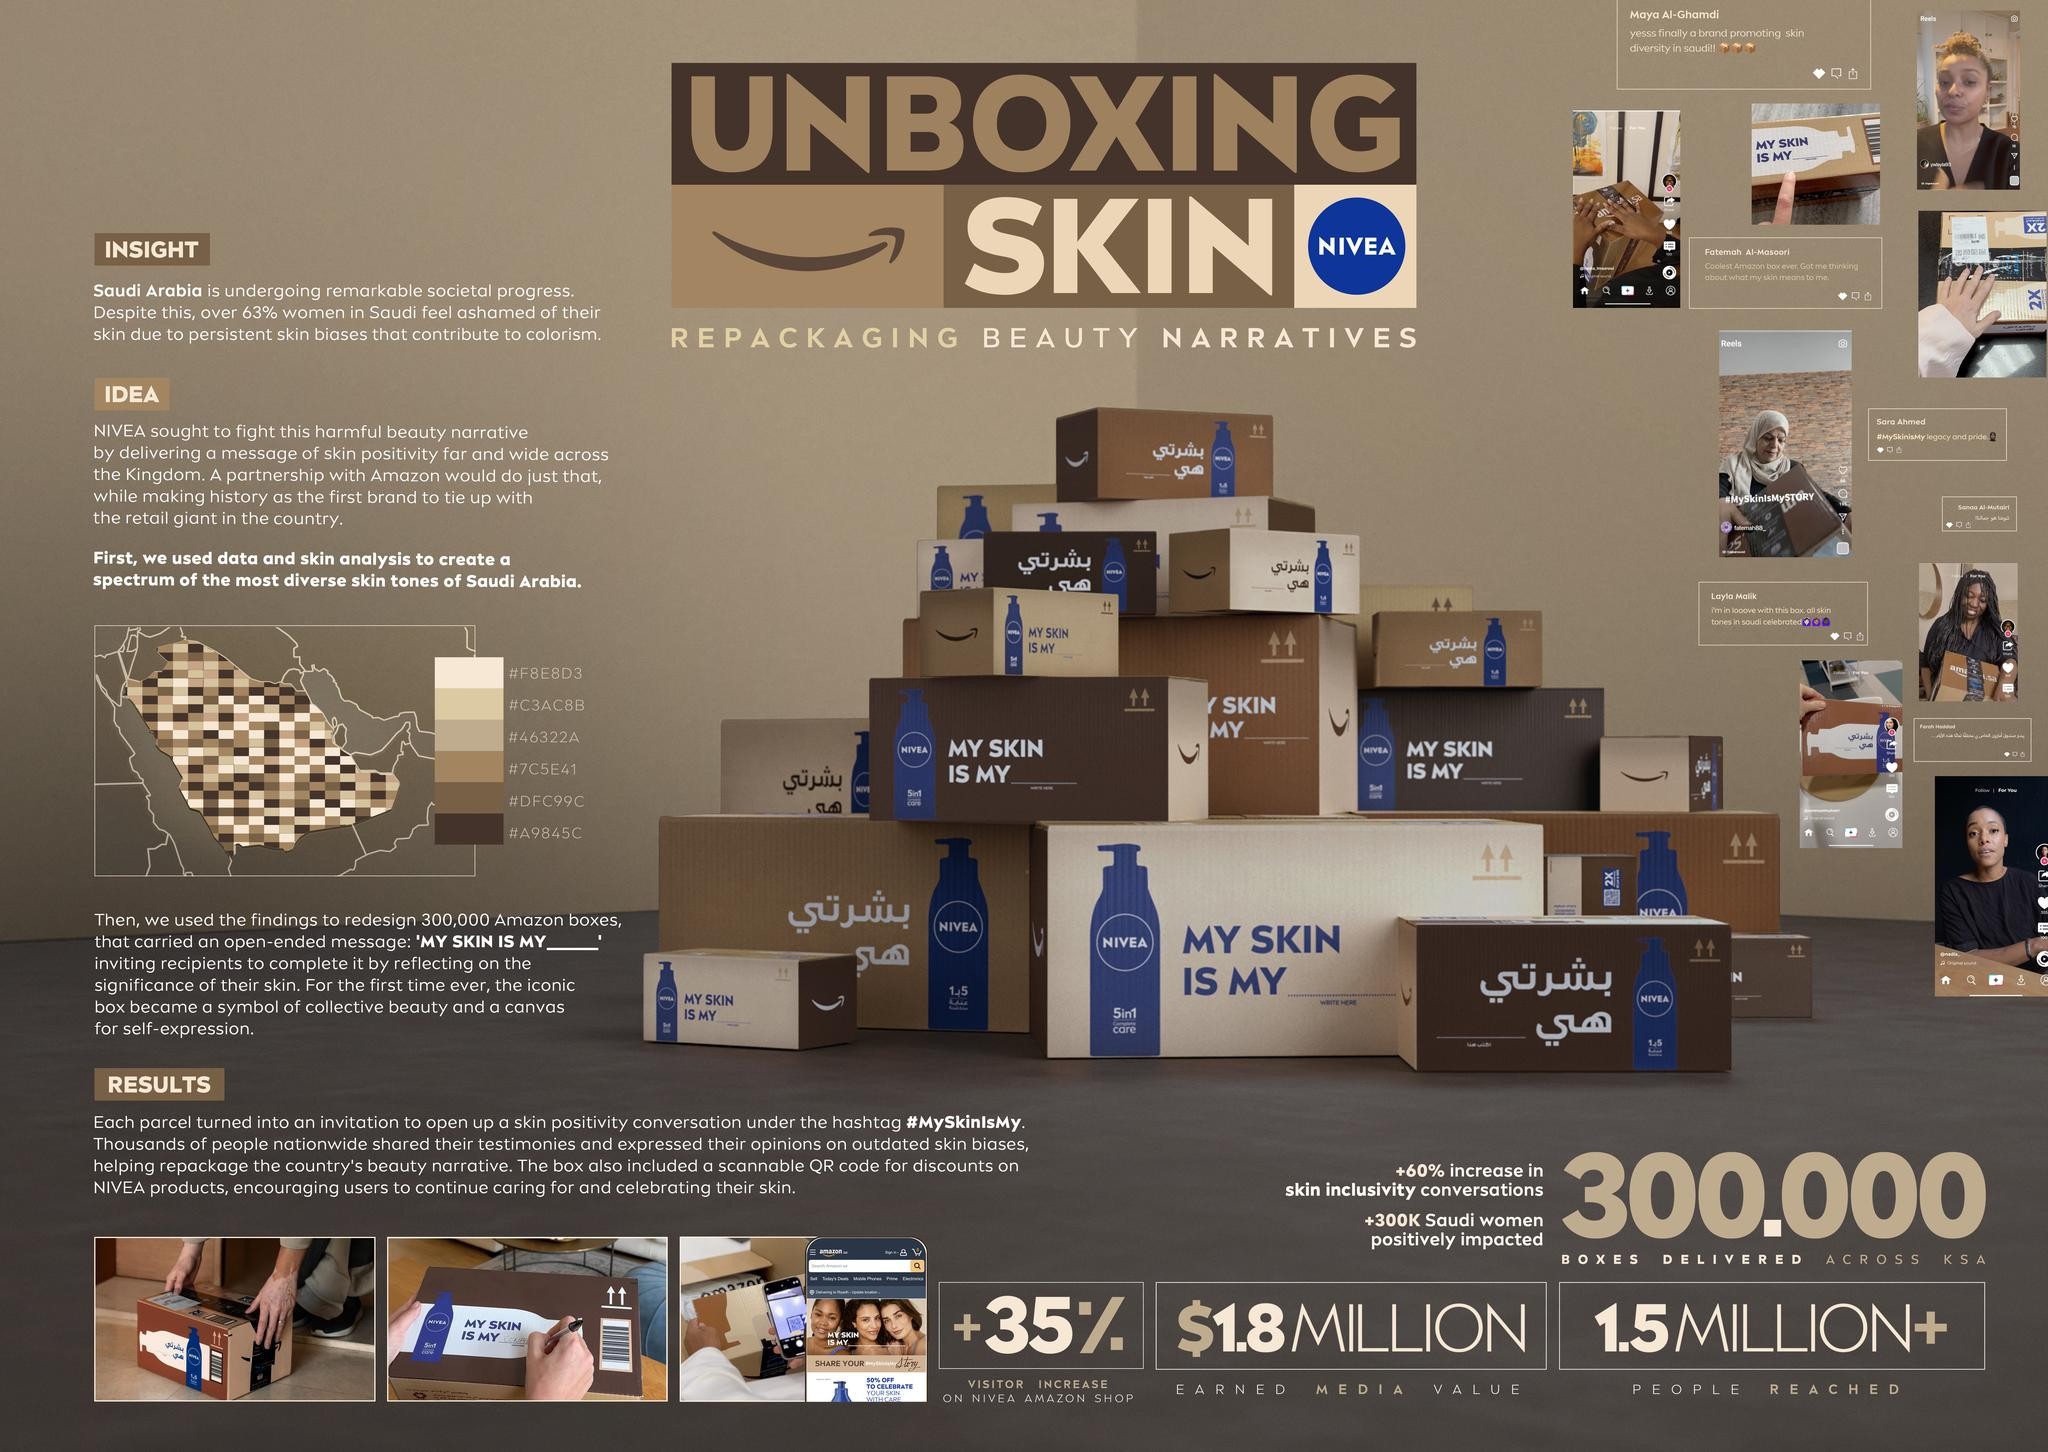 Unboxing Skin